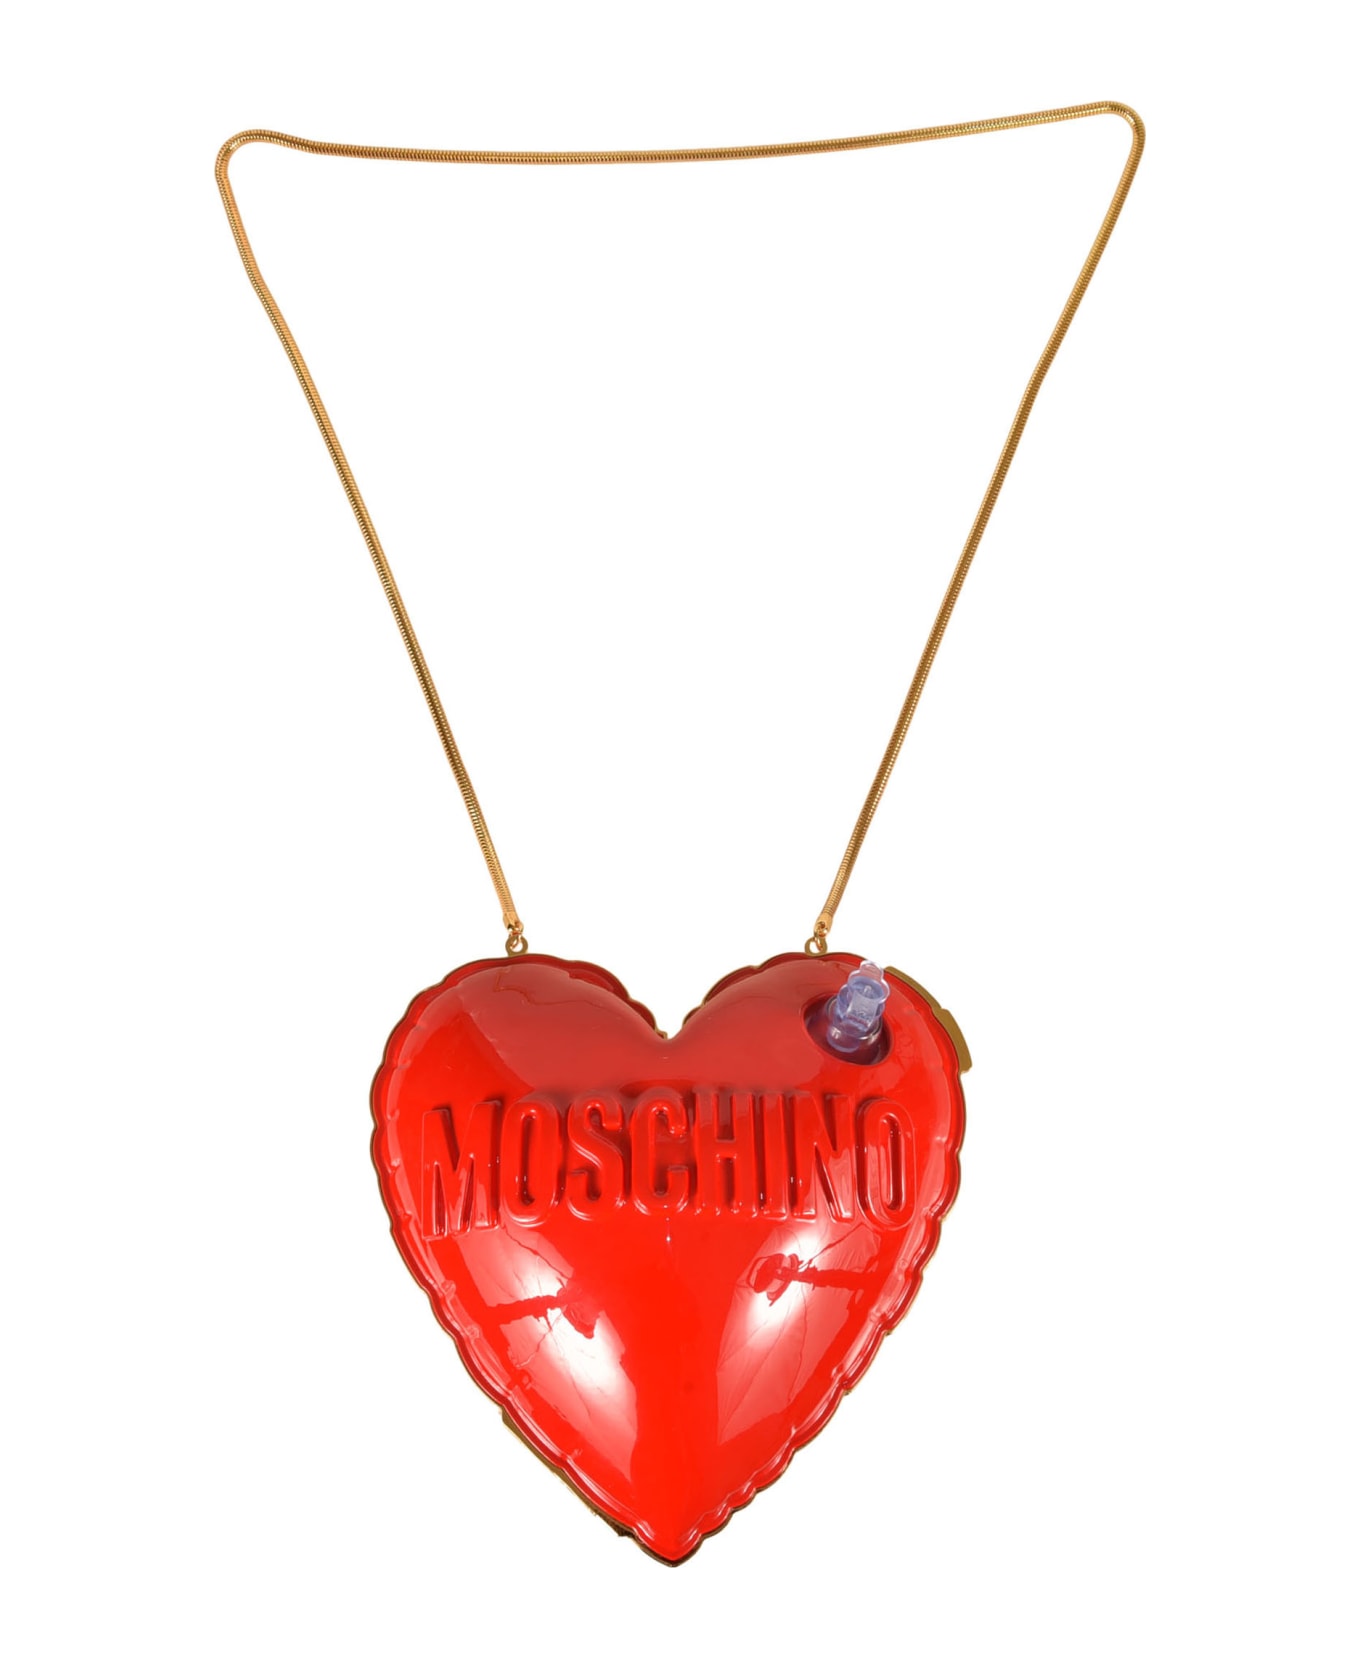 Moschino Inflatable Heart Shoulder Bag - 0112 ショルダーバッグ